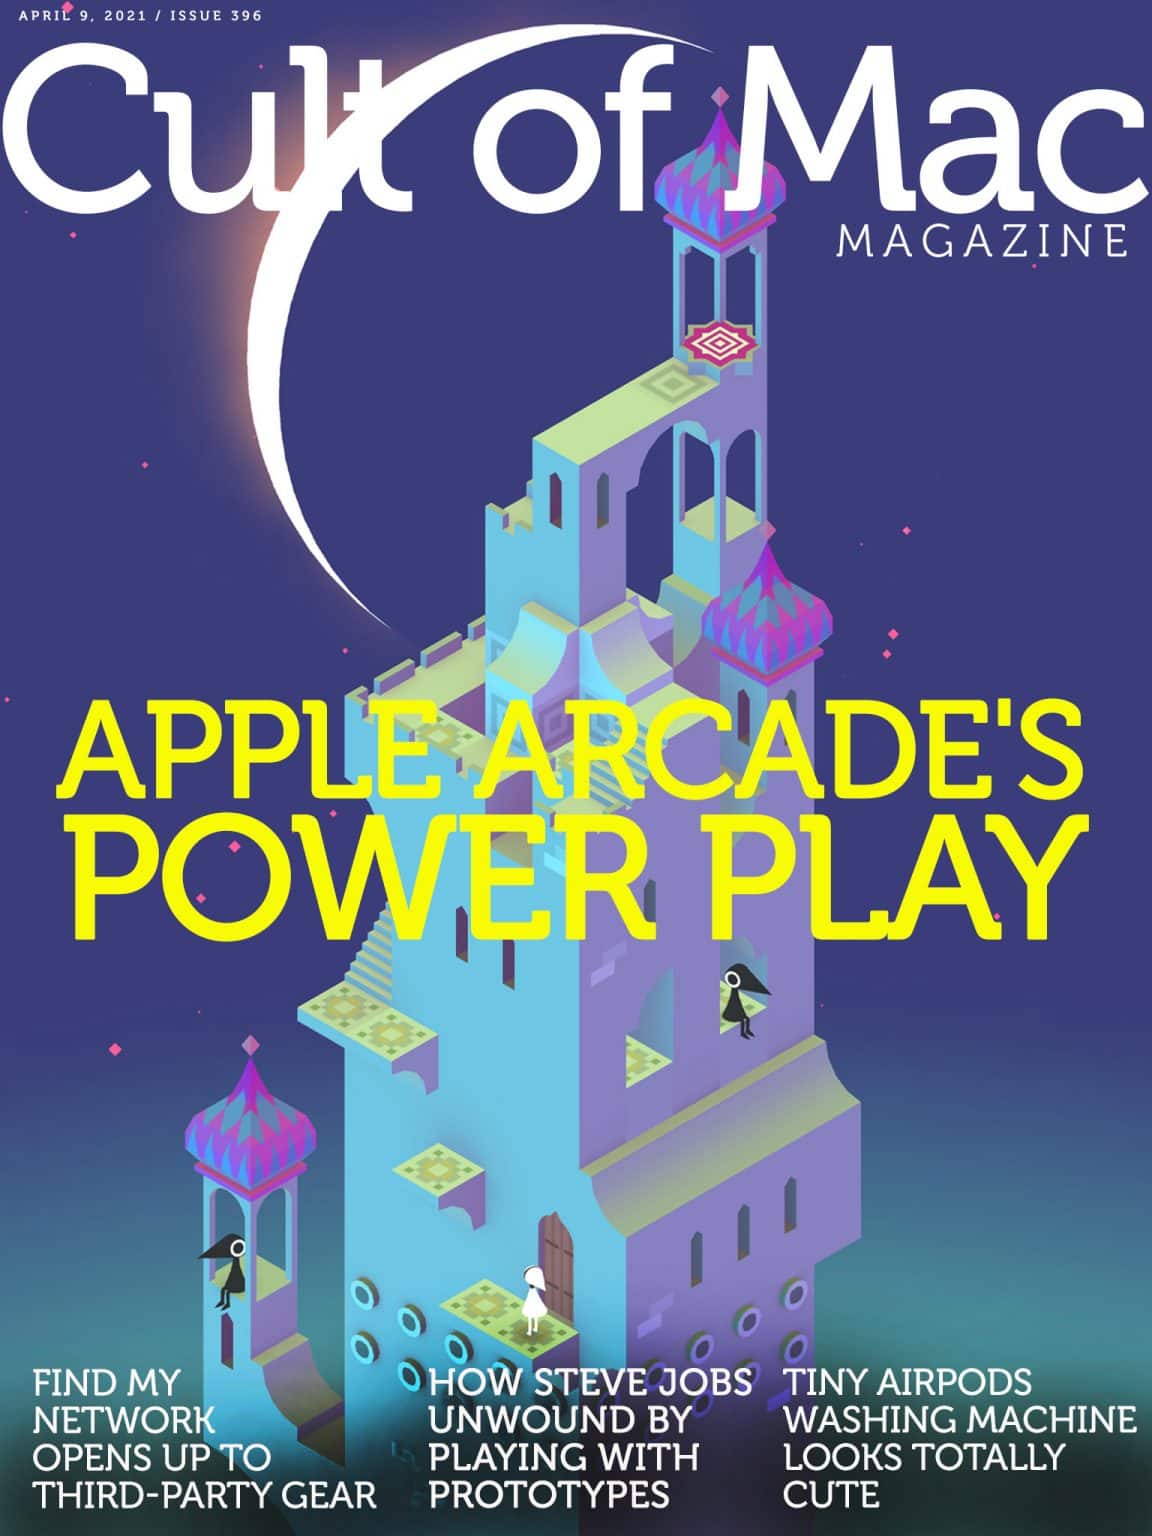 Apple Arcade looks ready to be a major player.